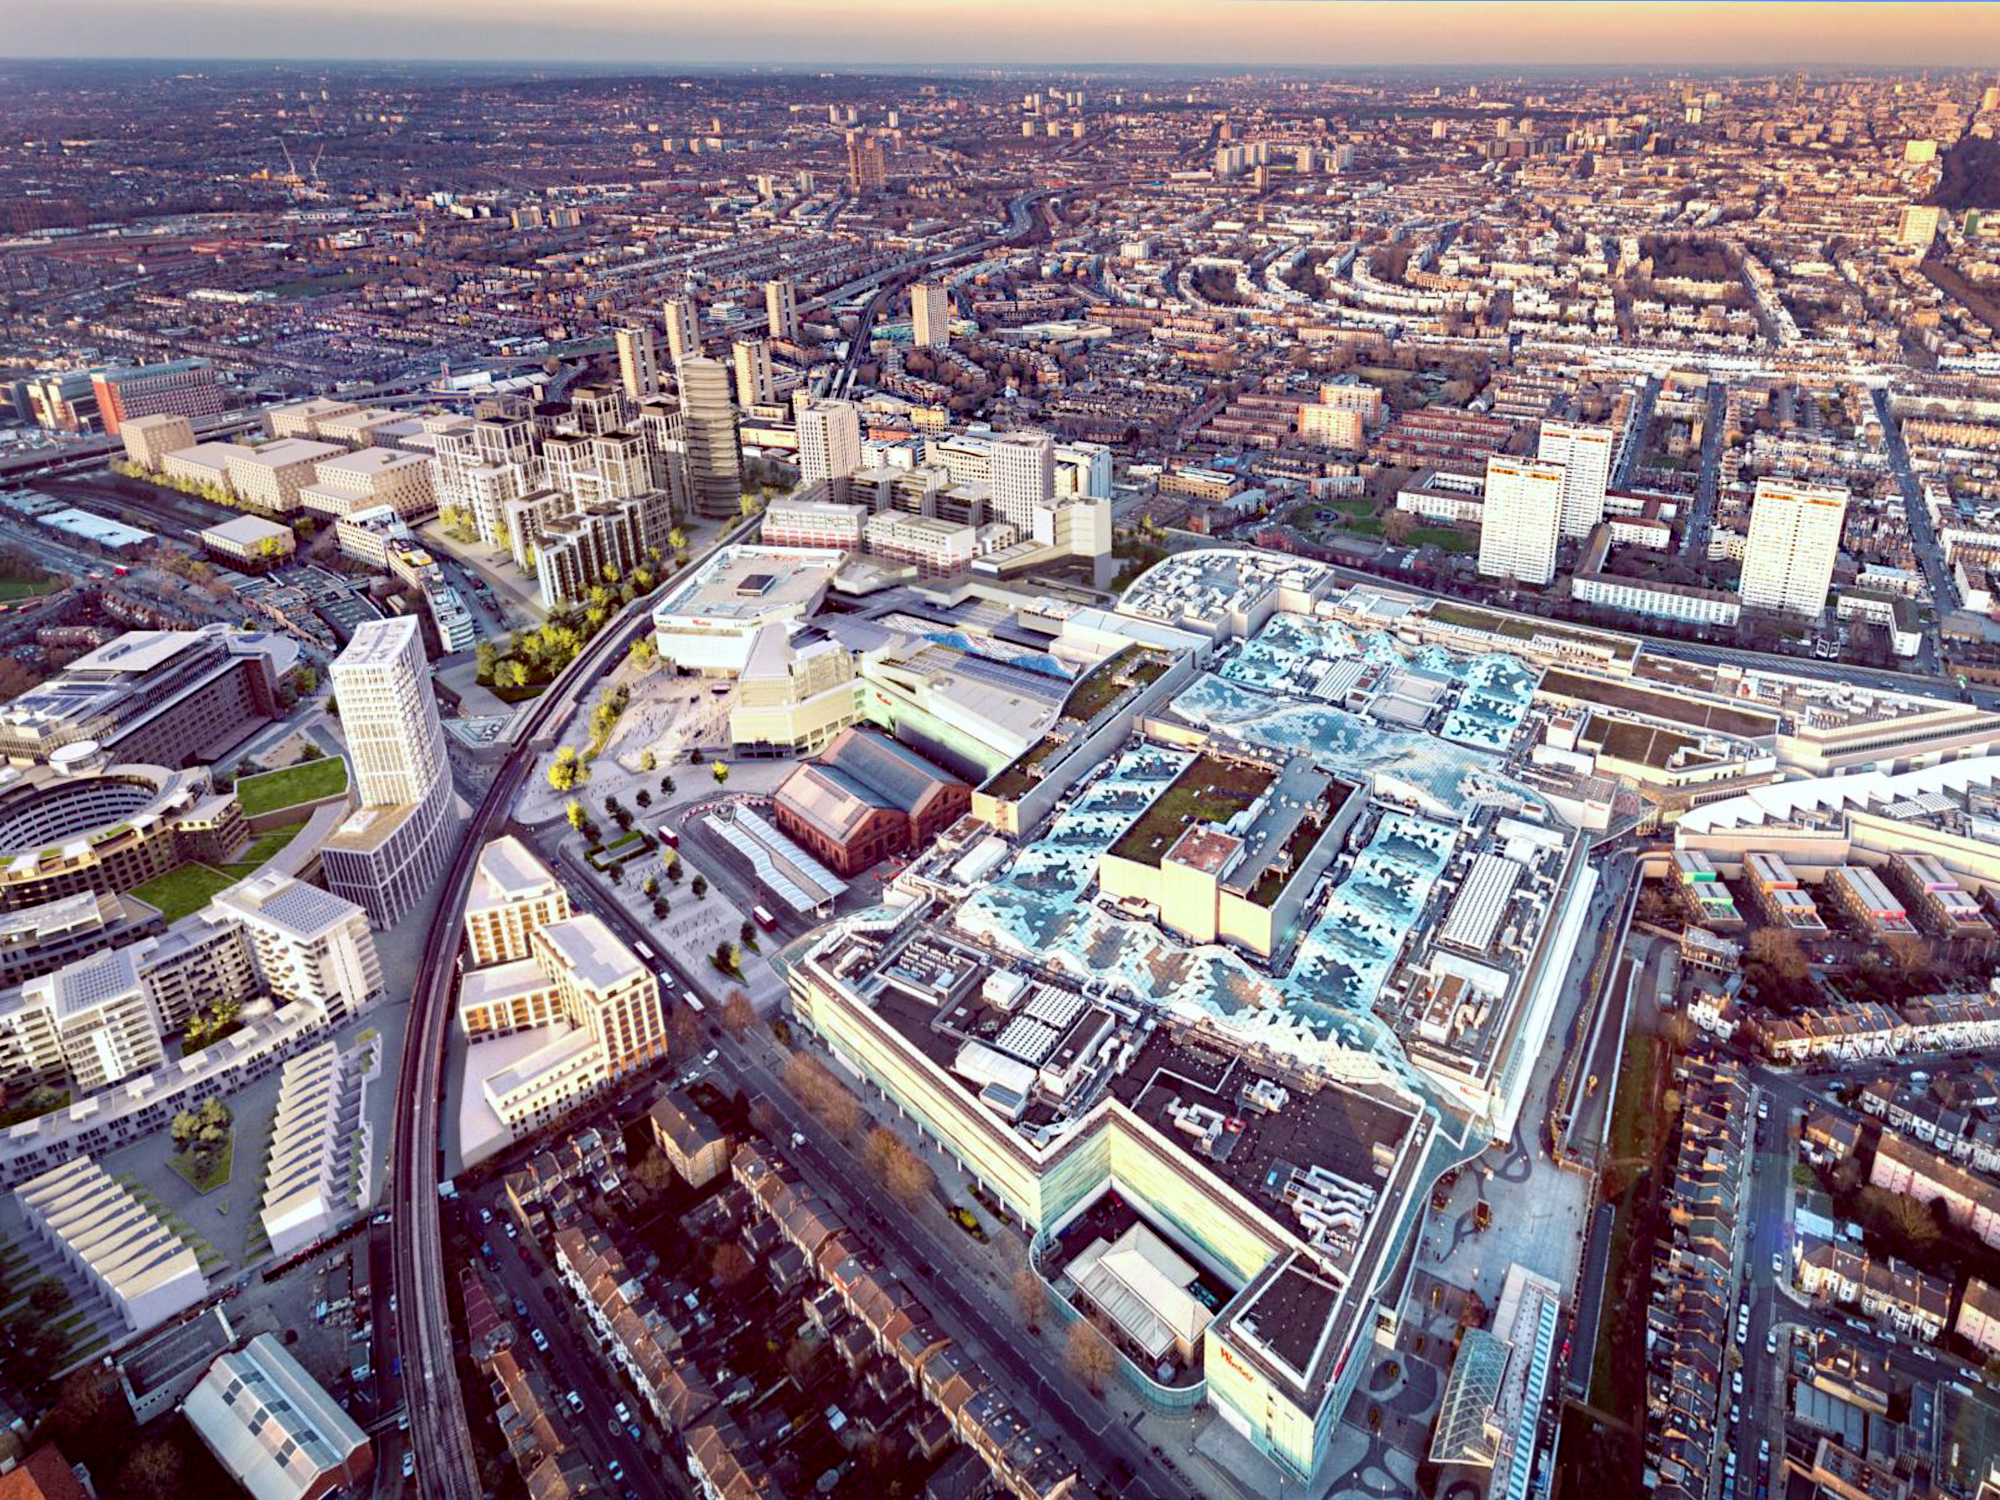 Westfield London - Mixed-Use Retail, Residential, Office & Entertainment